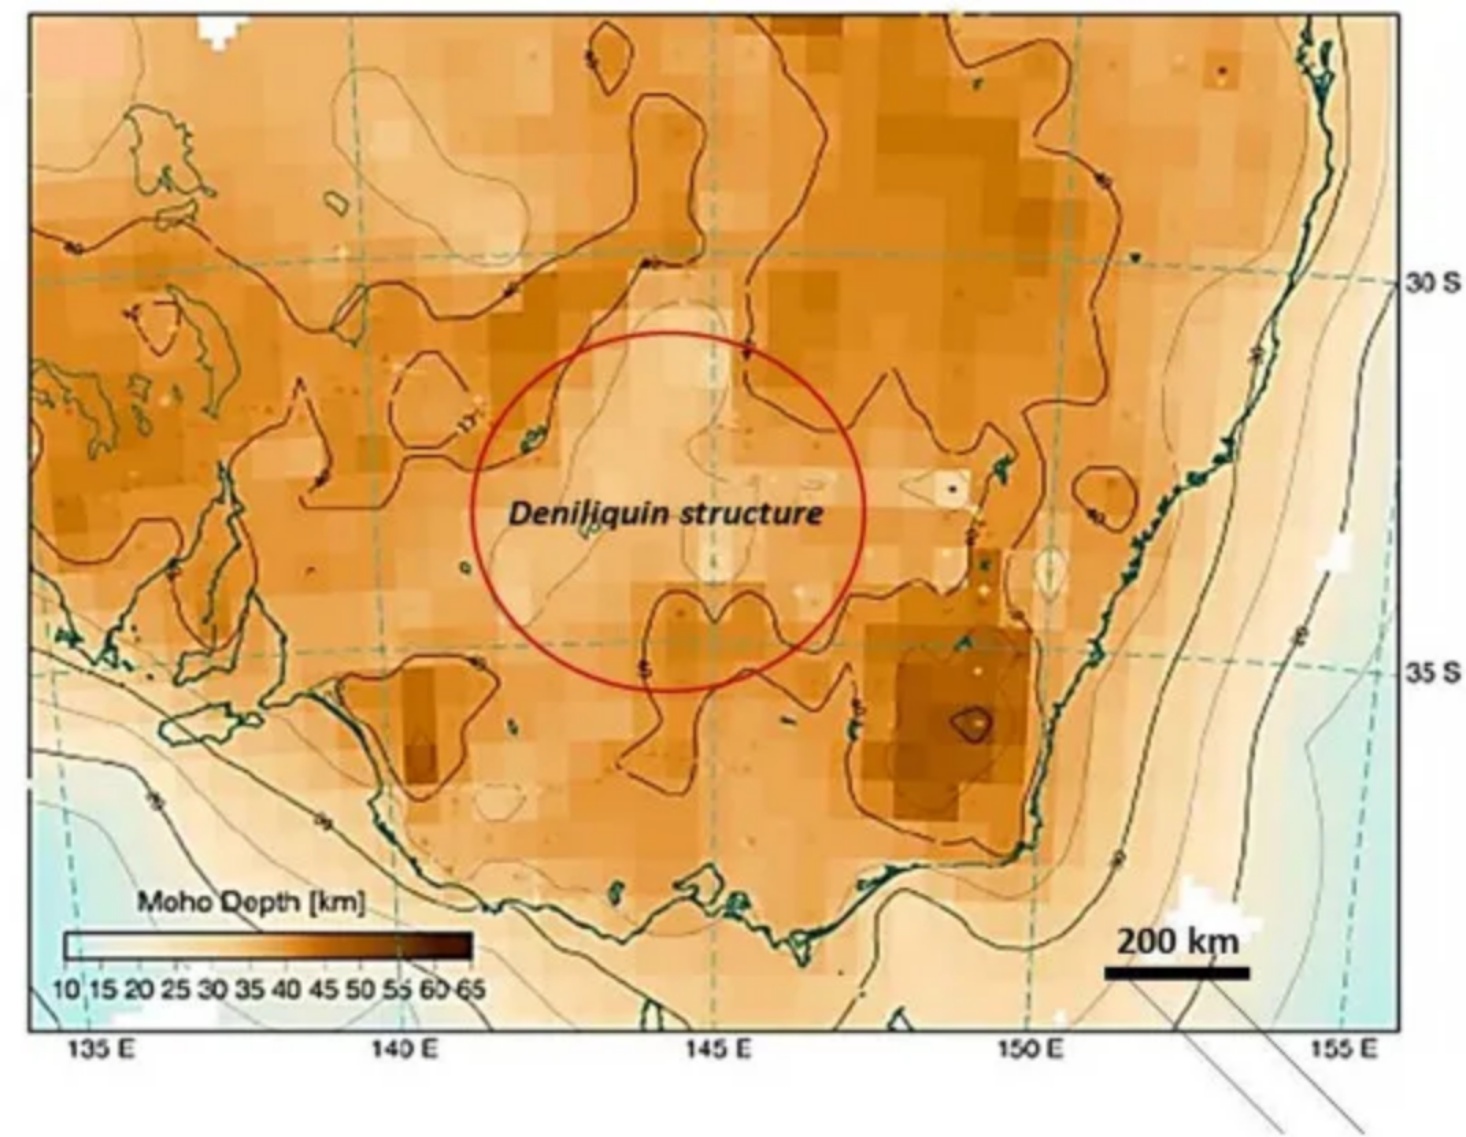 The researchers found that the Deniliquin structure is associated with a large anomaly in the Earth's gravity field. This anomaly is thought to be caused by a large mass of dense rock, which is consistent with the presence of an impact structure.